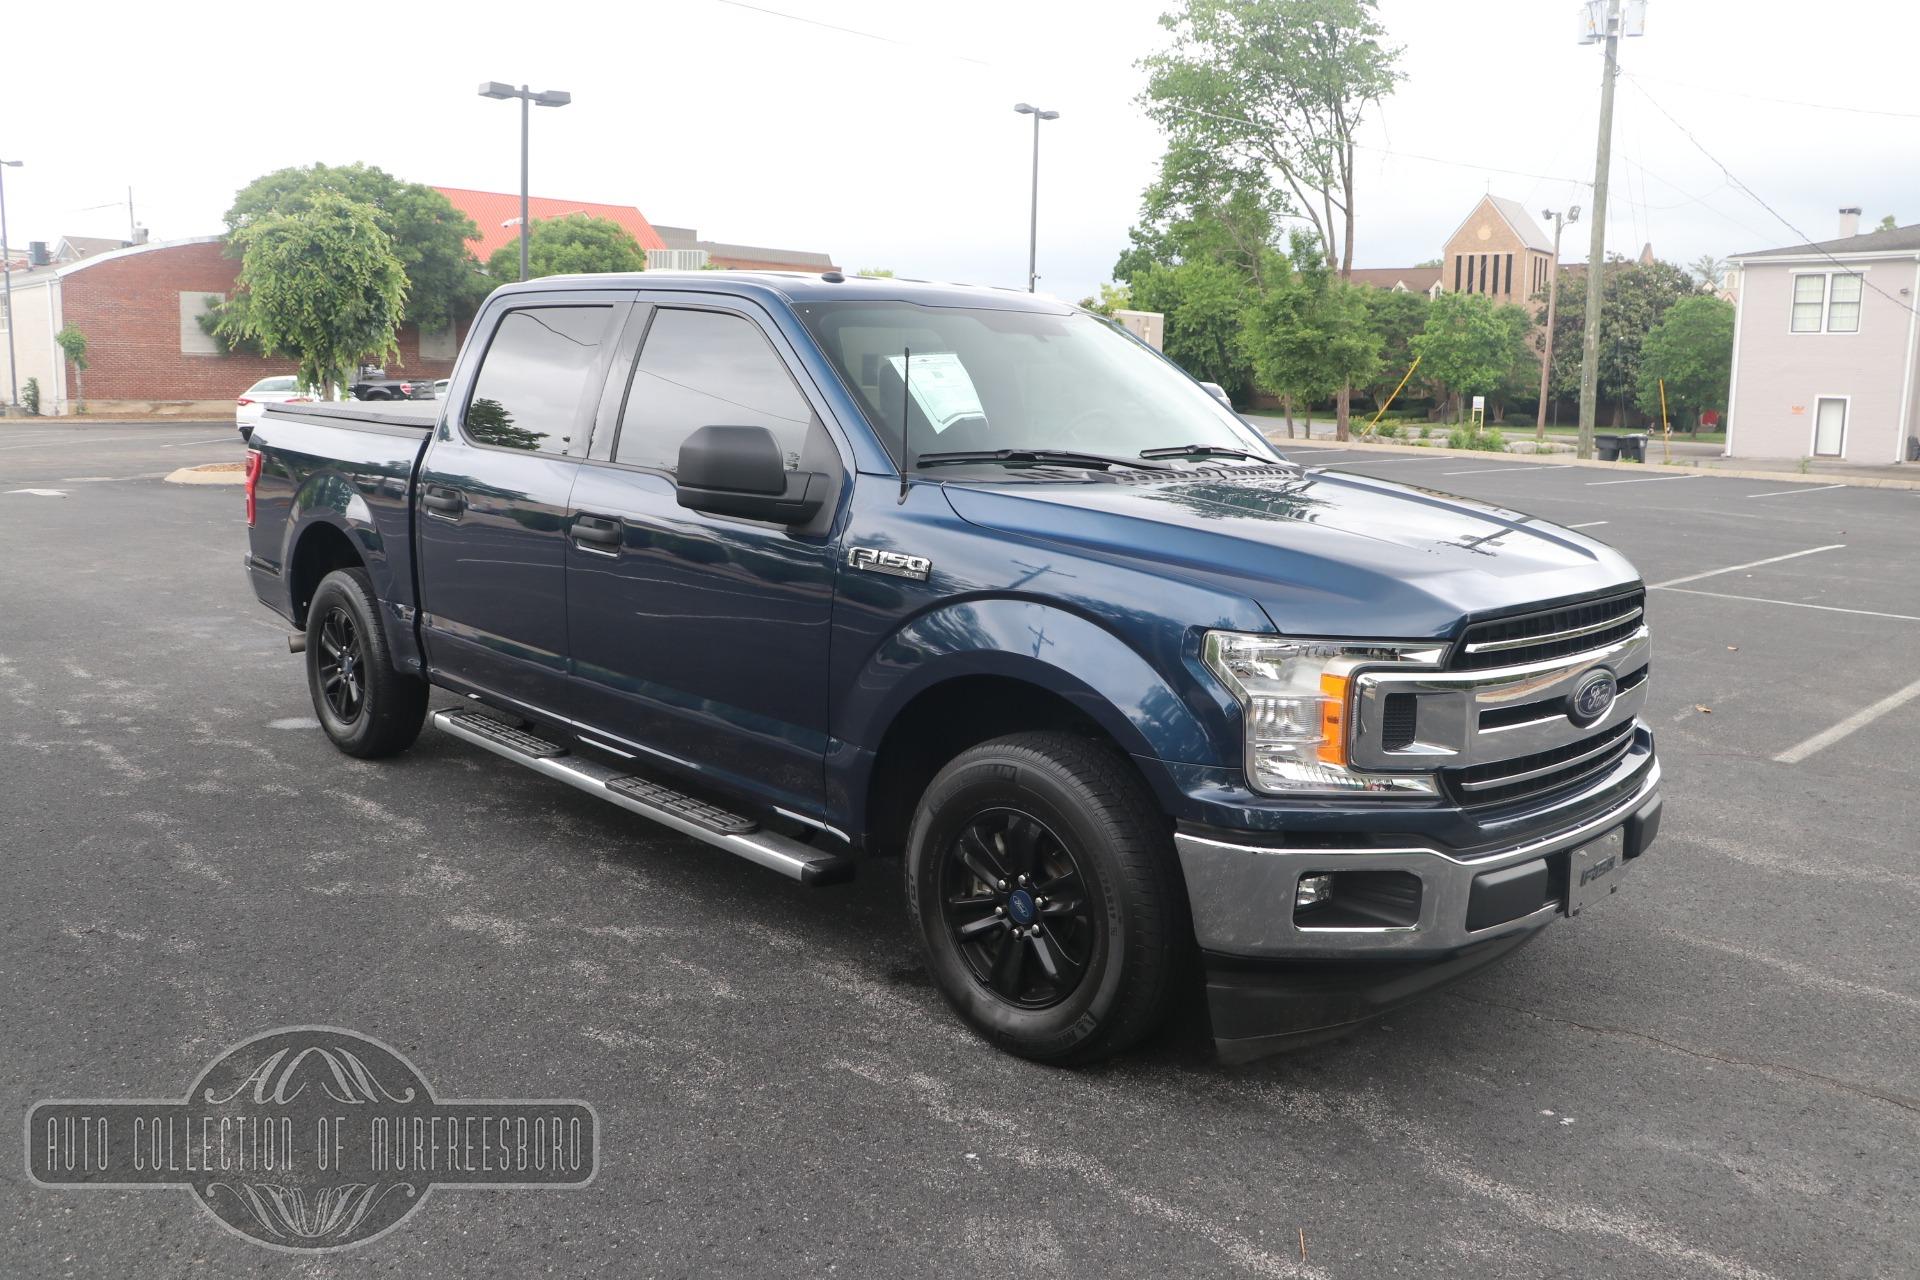 Used 2018 Ford F-150 XLT 4X2 SUPERCREW 145 WHEEL BASE 2.7L ECOBOOST 10 SPEED W/TOW MODE for sale $40,500 at Auto Collection in Murfreesboro TN 37130 1